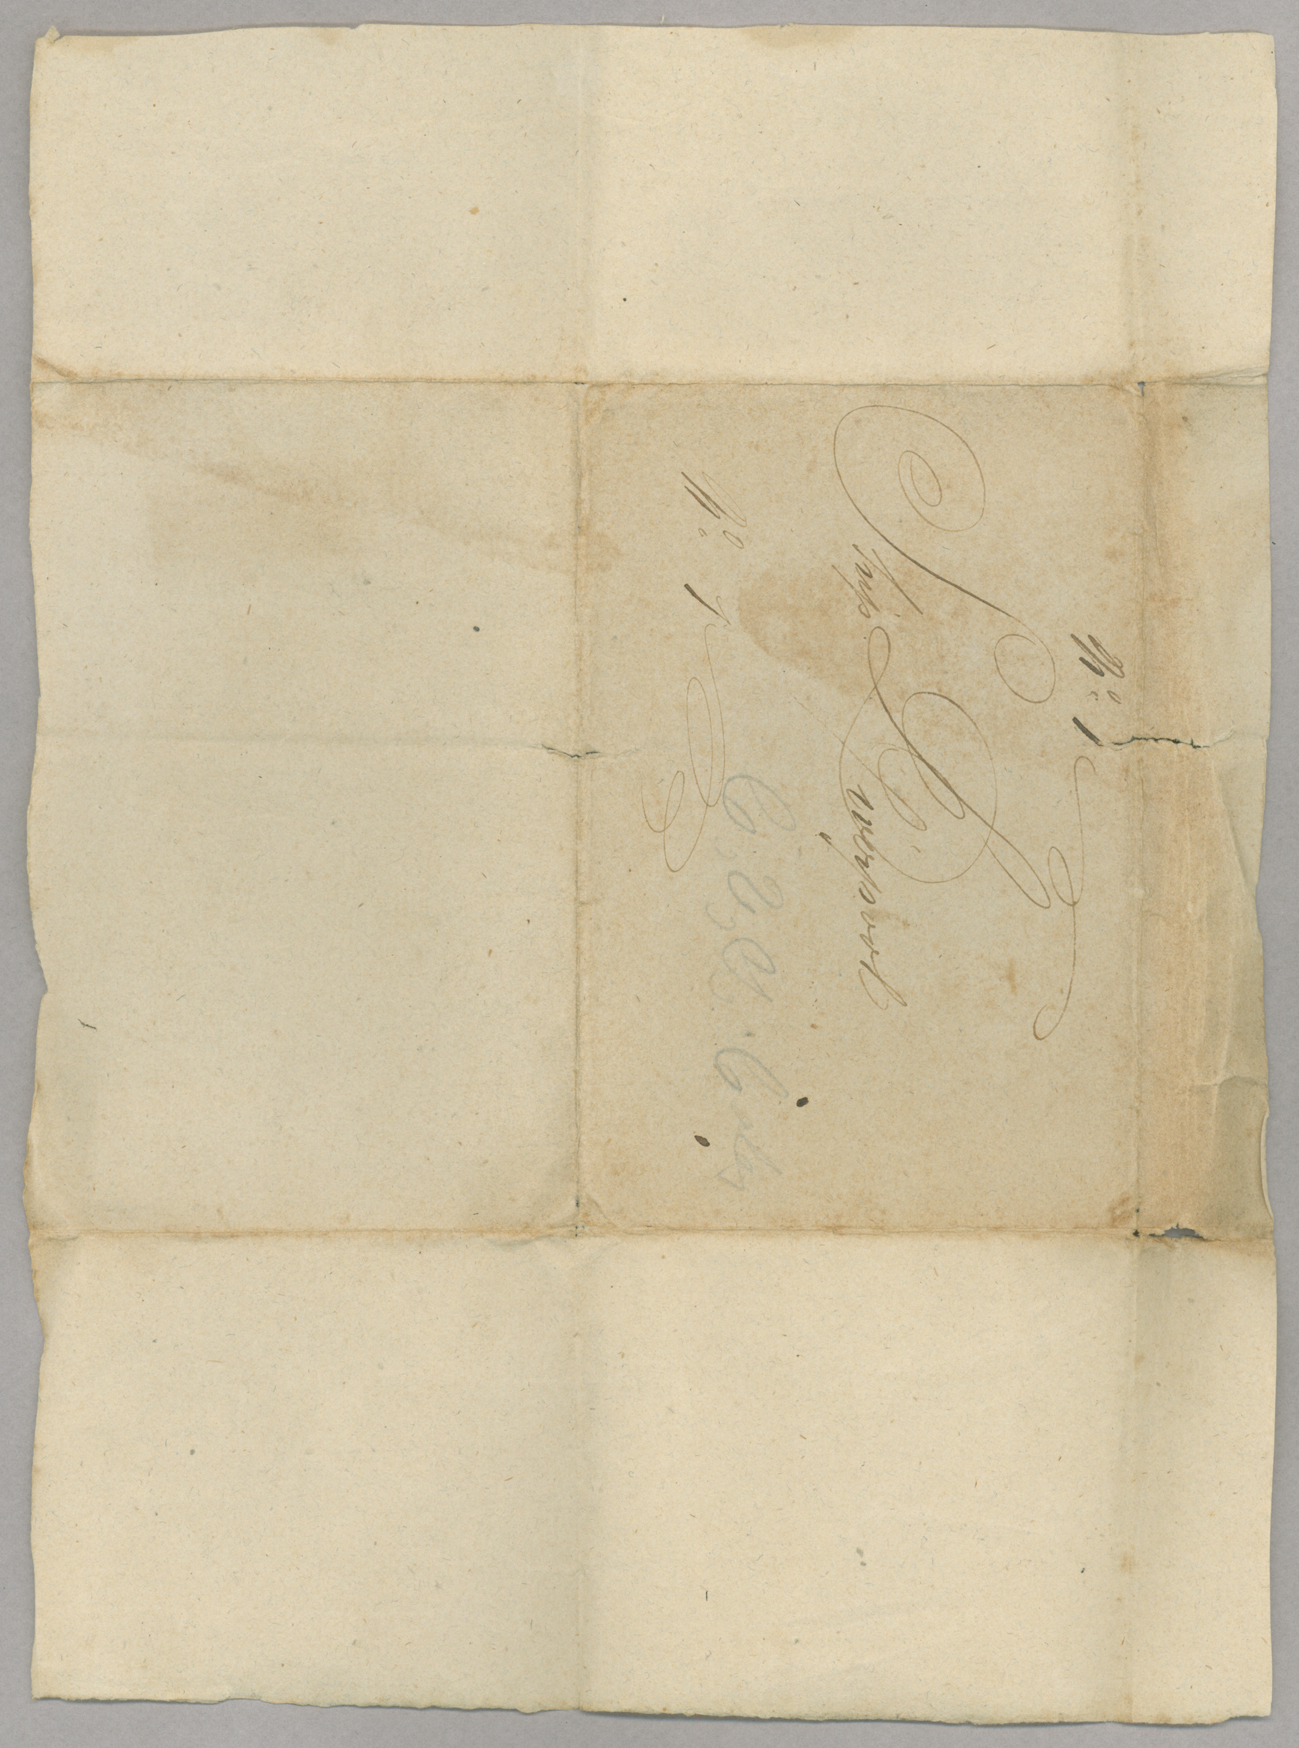 Letter, [Hewlett Townsend Coles], at sea, to "My Dear Beloved Catherine," [Catherine Van Suydam Coles], n.p., Wrapper